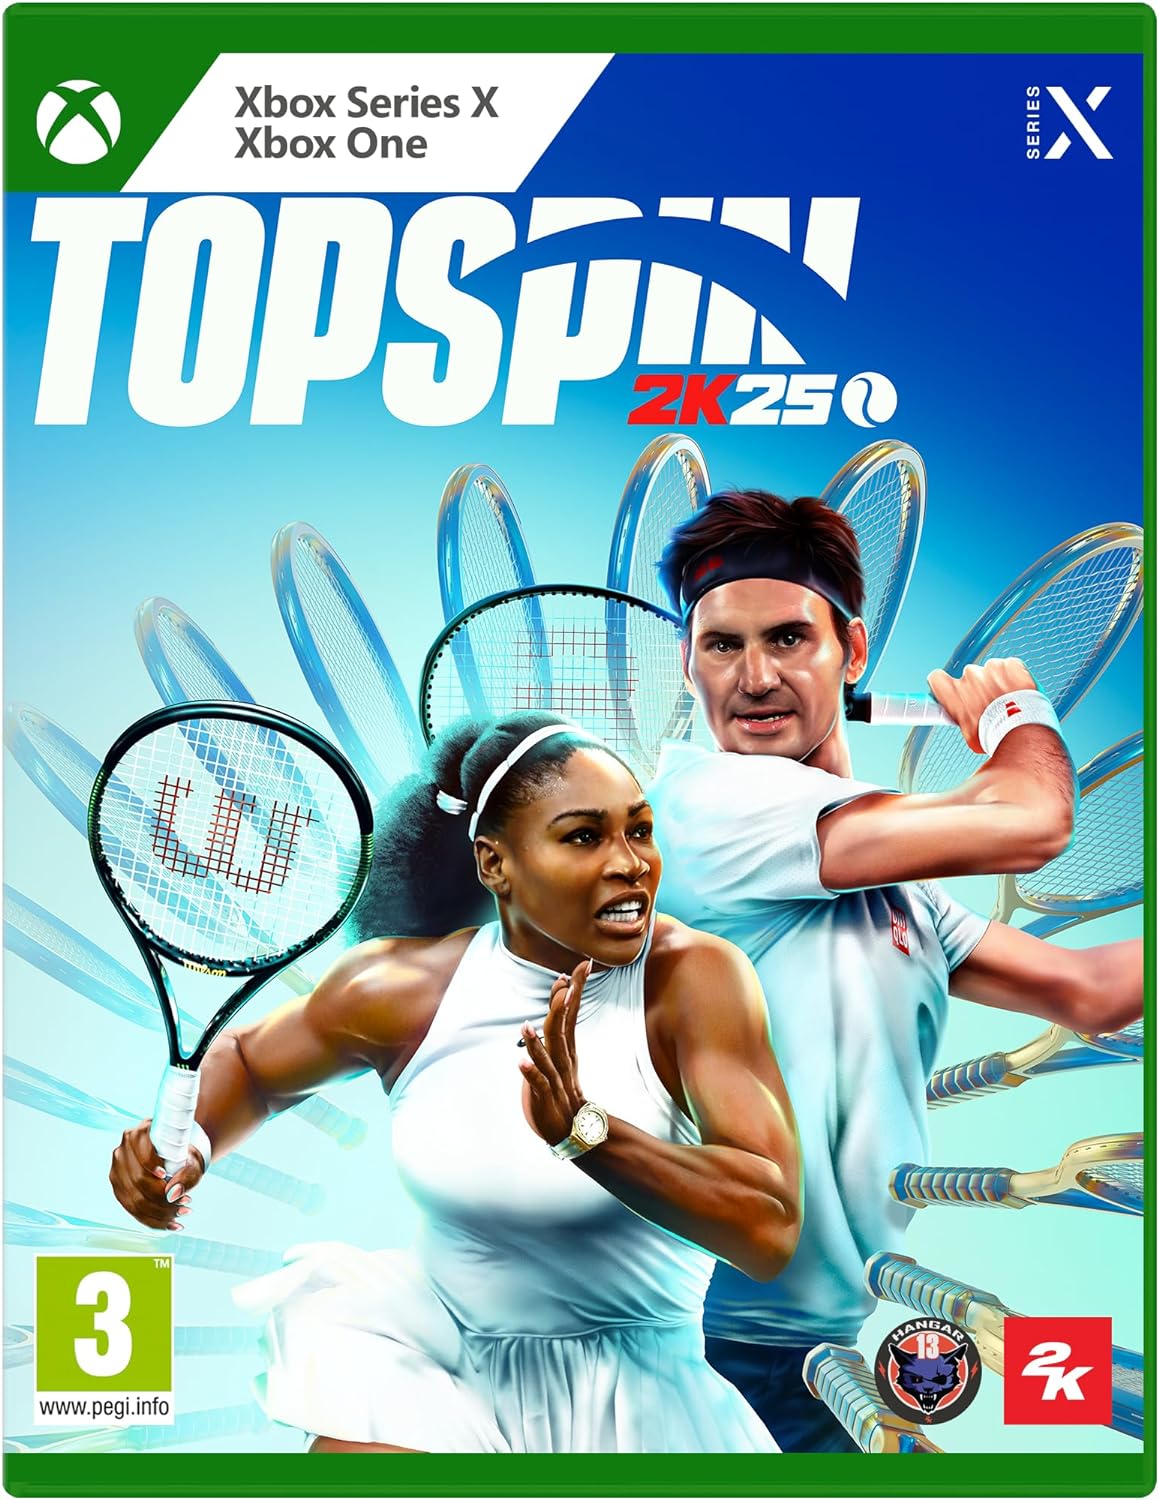 TopSpin 2K25 Digital Download Key (Xbox One/Series X): Europe